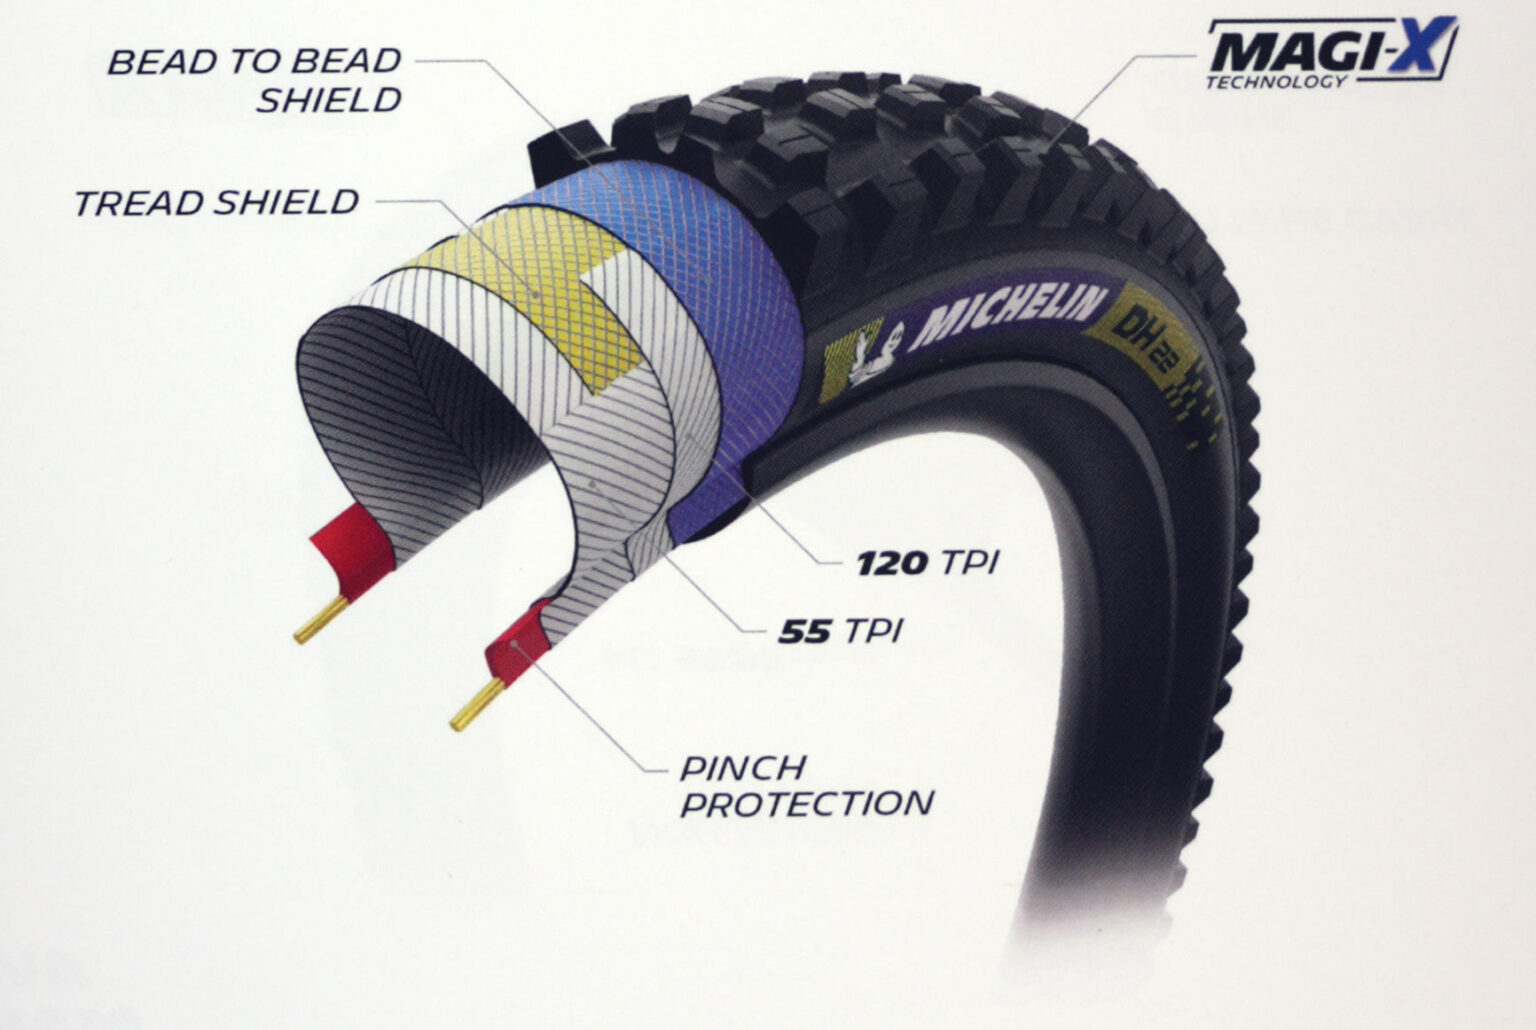 casing construction for michelin DH tires in 2024